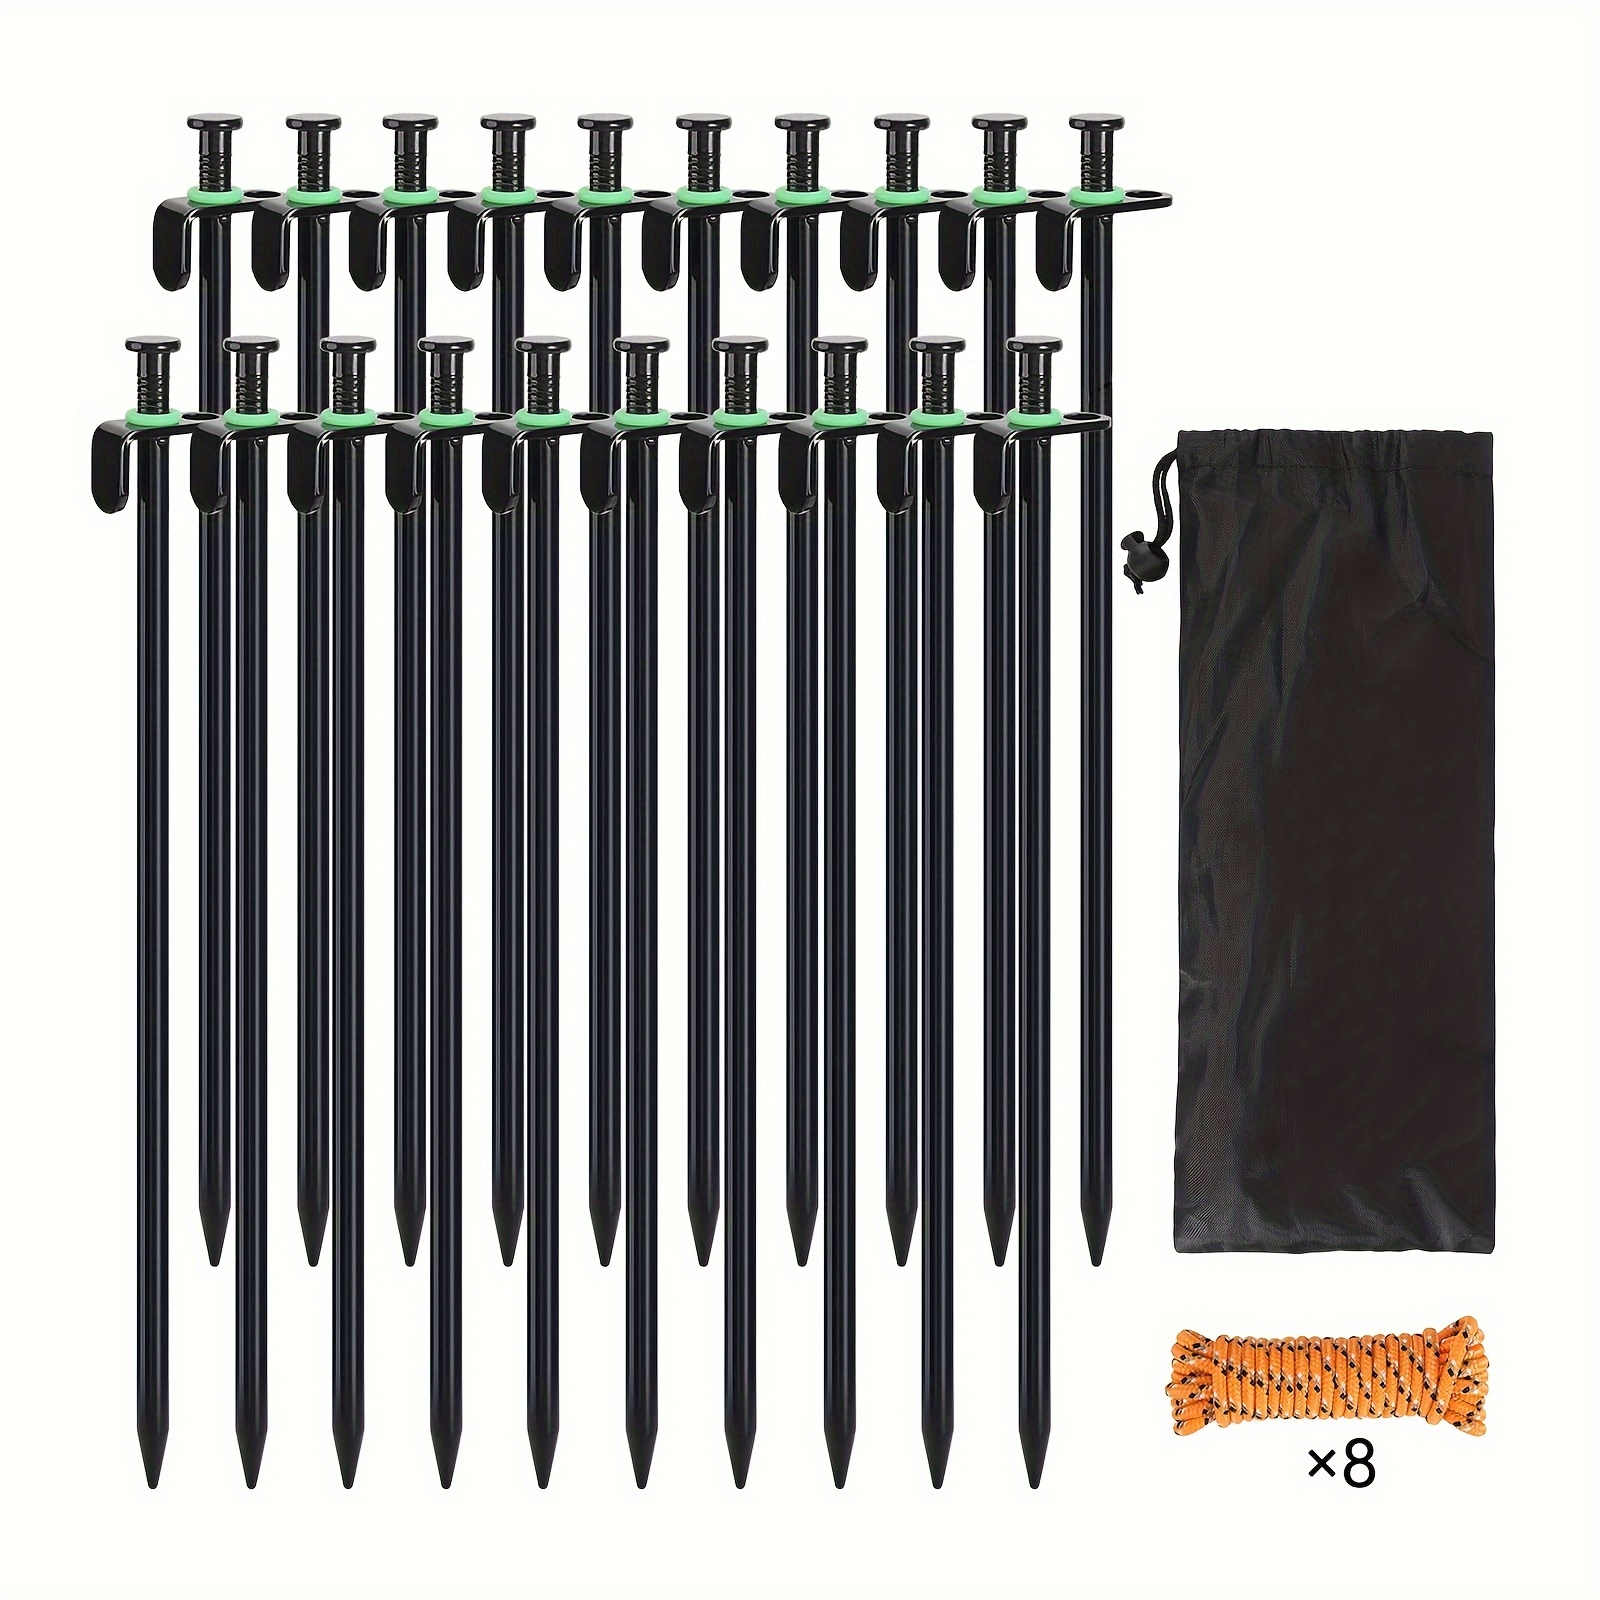 

20 Pack Tent Stakes Metal, 12 Inch Camping Stakes With 8 X 10 Ft Ropes & Storage Bags, Heavy Duty Tent Pegs With Fluorescent Rings For Camping, Canopies, Patio, Garden, Grassland, Outdoor